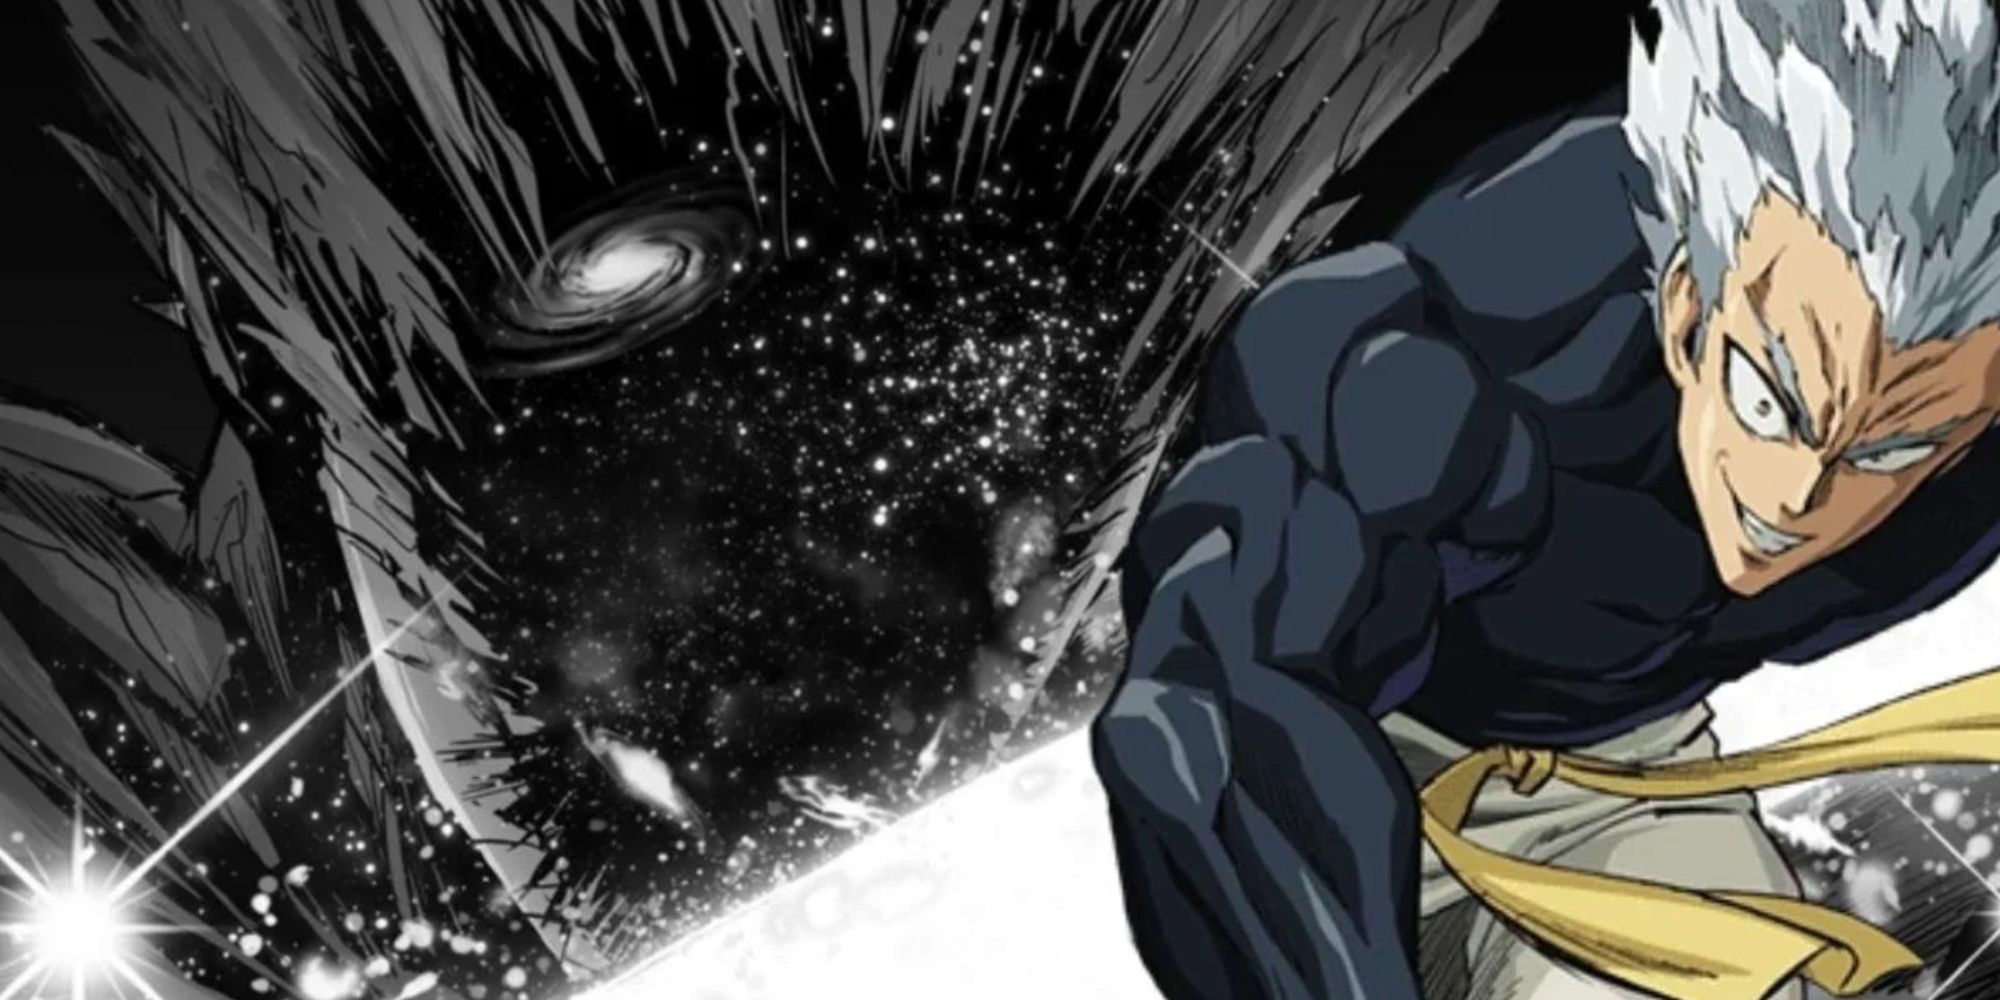 Cosmic fear garou character from one punch man